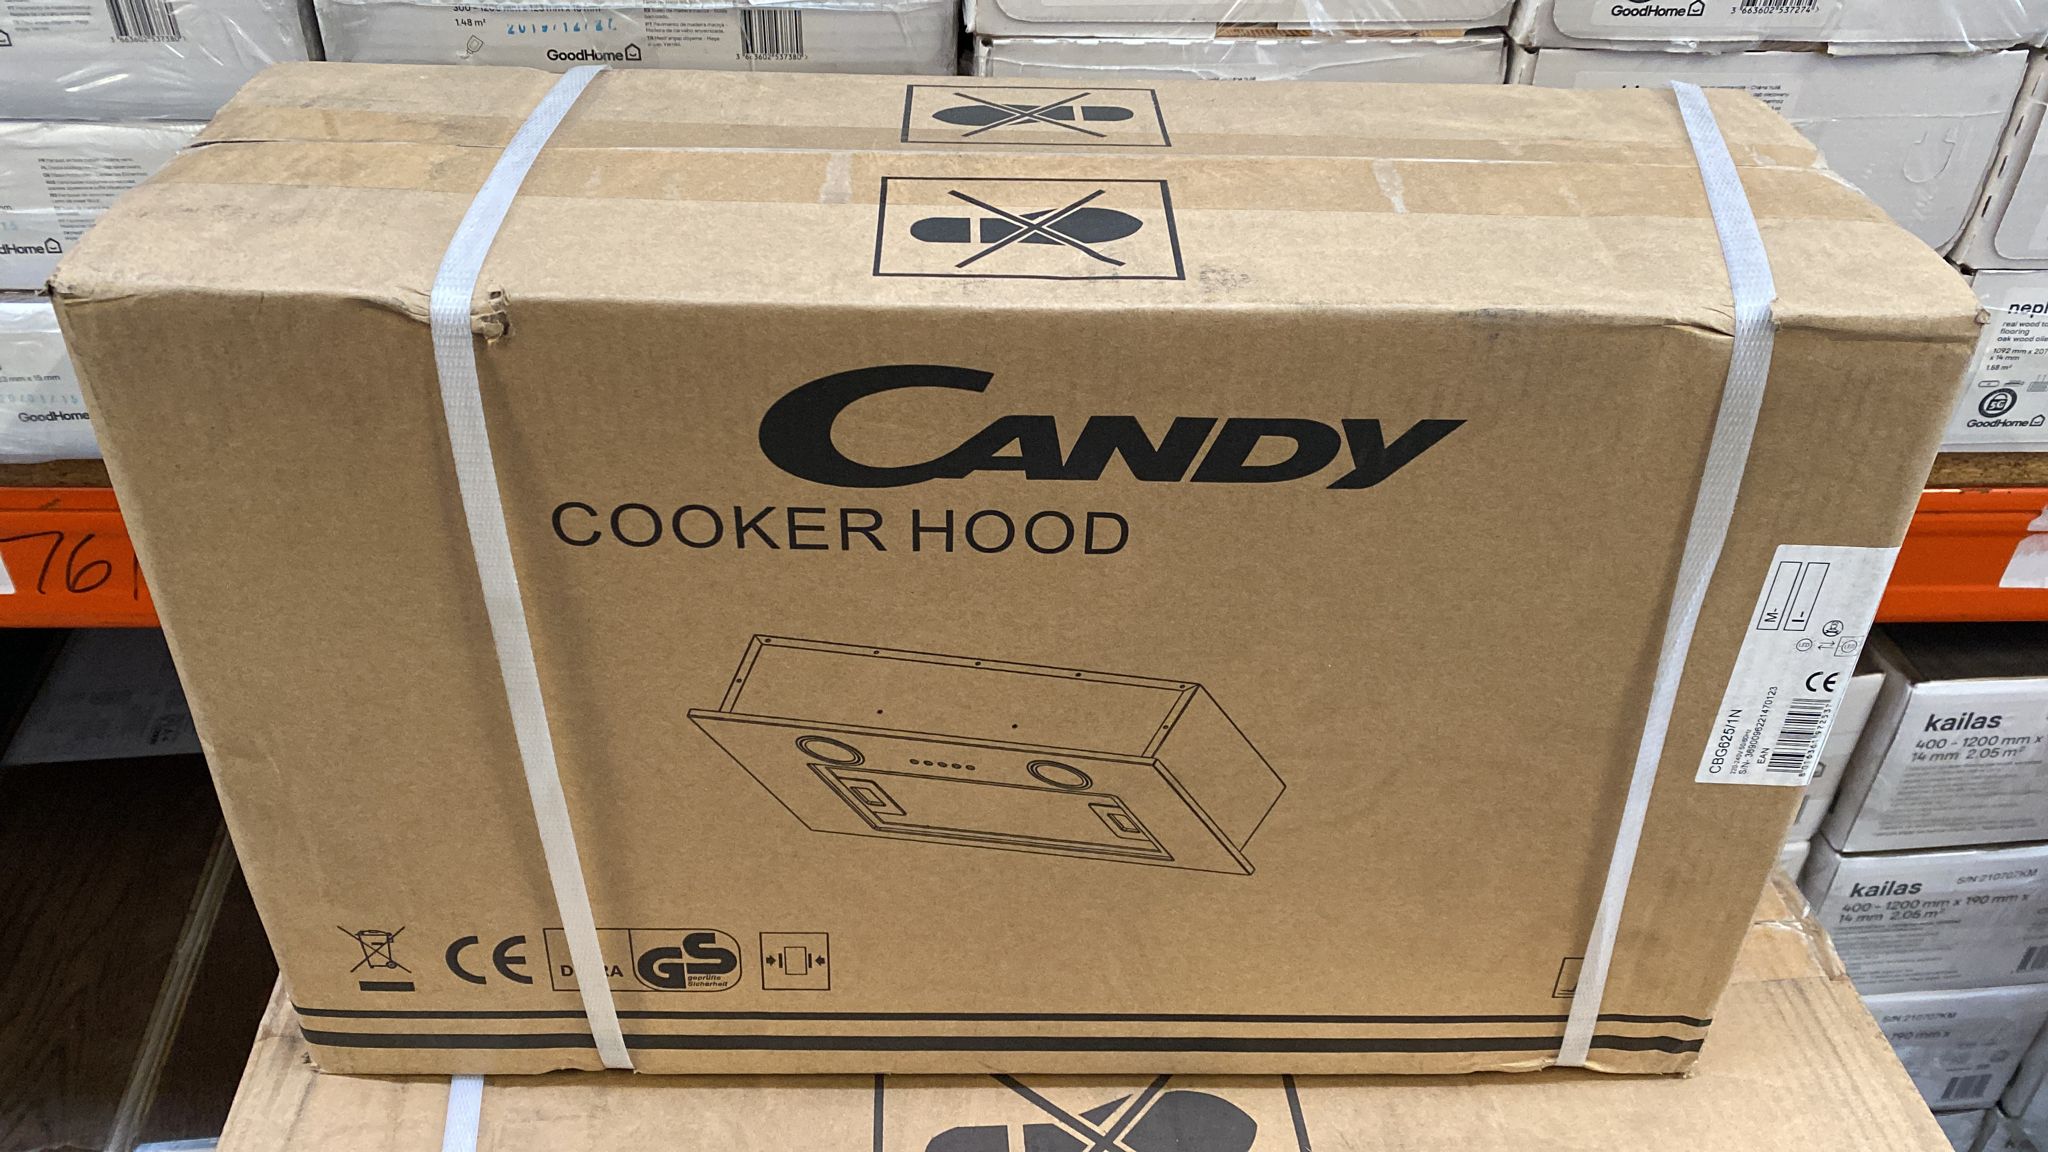 Candy Canopy Cooker Hood-Stainless Steel 52cm Black CBG625/1N 2537